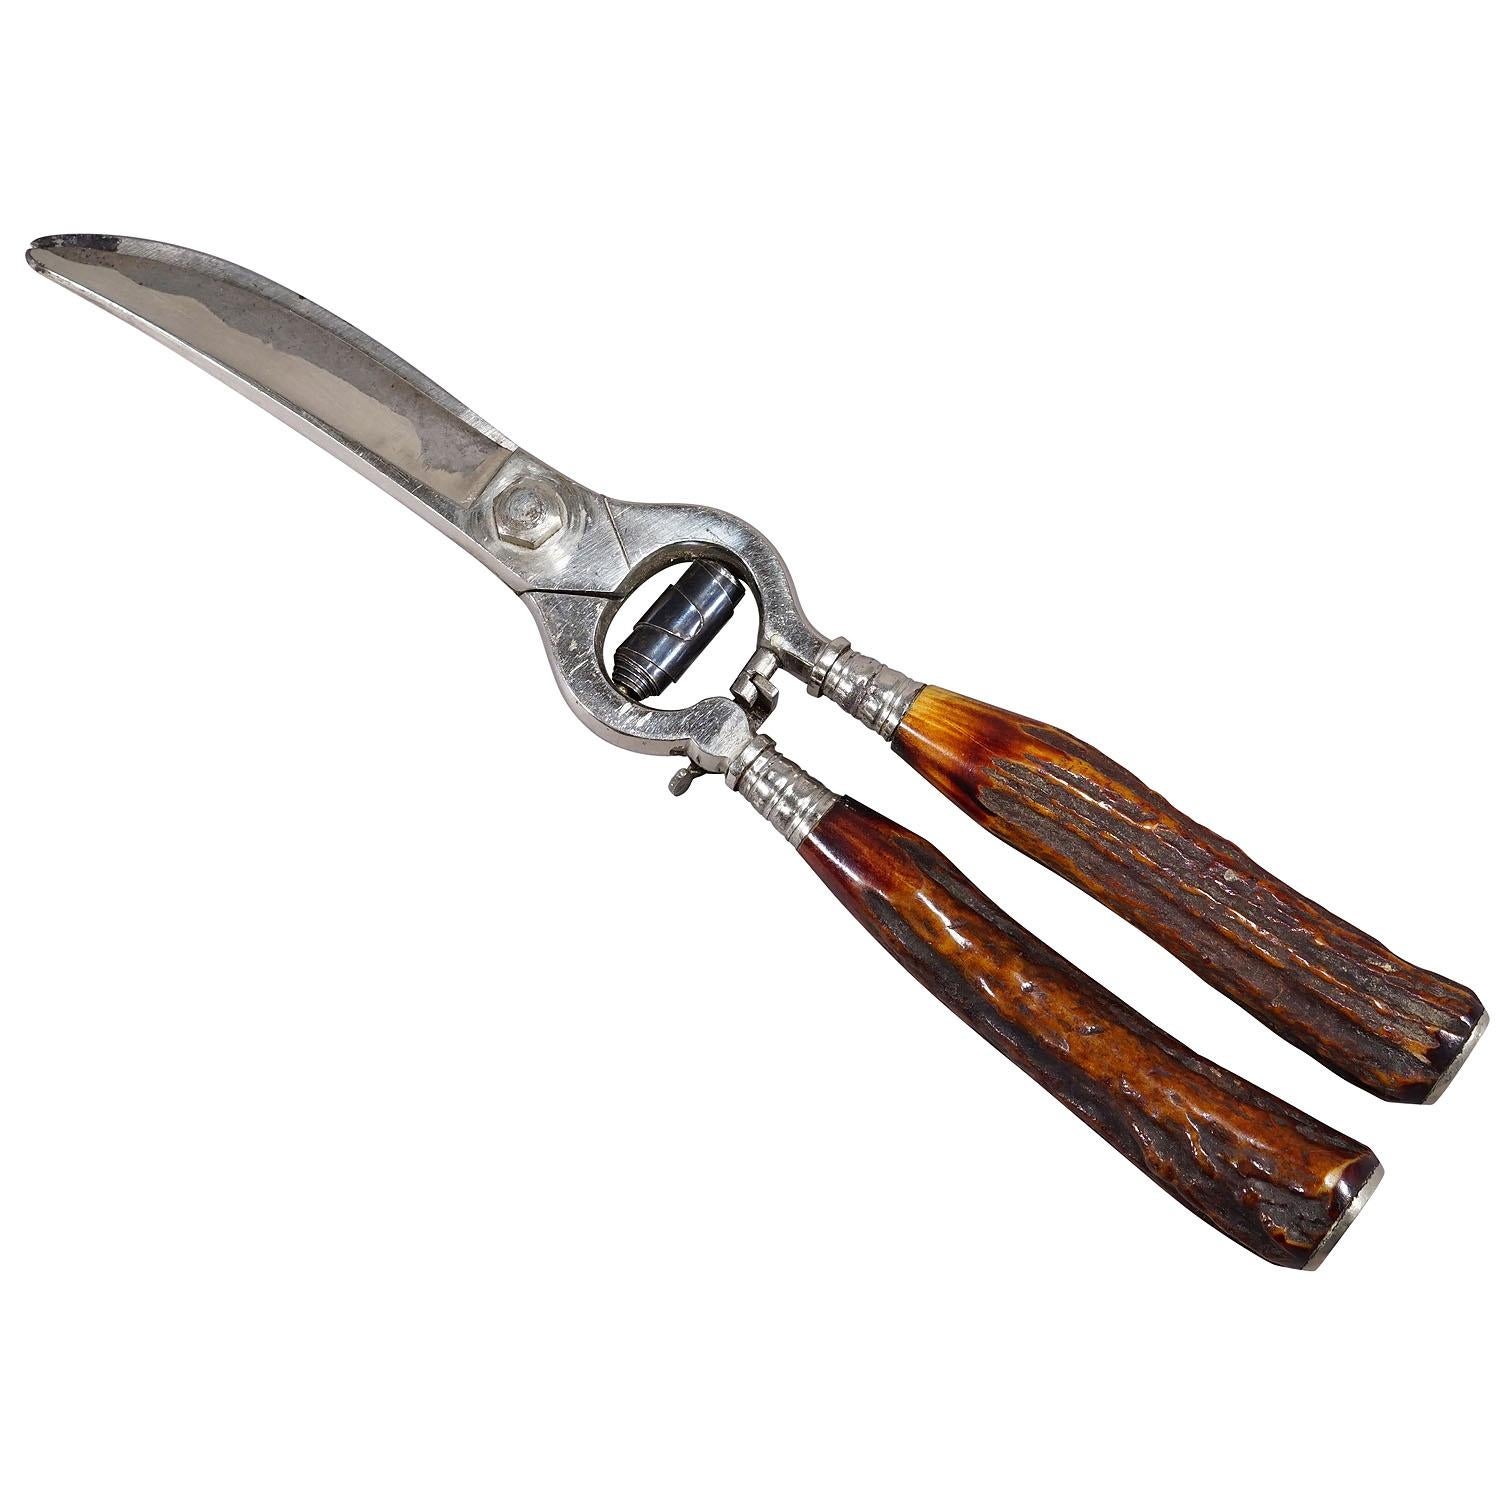 Vintage Stag Horn Winged Poultry Shears by J. A. Henkels, Solingen

A rustic winged poultry shears with handles made of genuine stag horn. Blades made of chromed steel. Manufactured by J. A. Henkels in Solingen Germany ca. 1950s. Good condition with